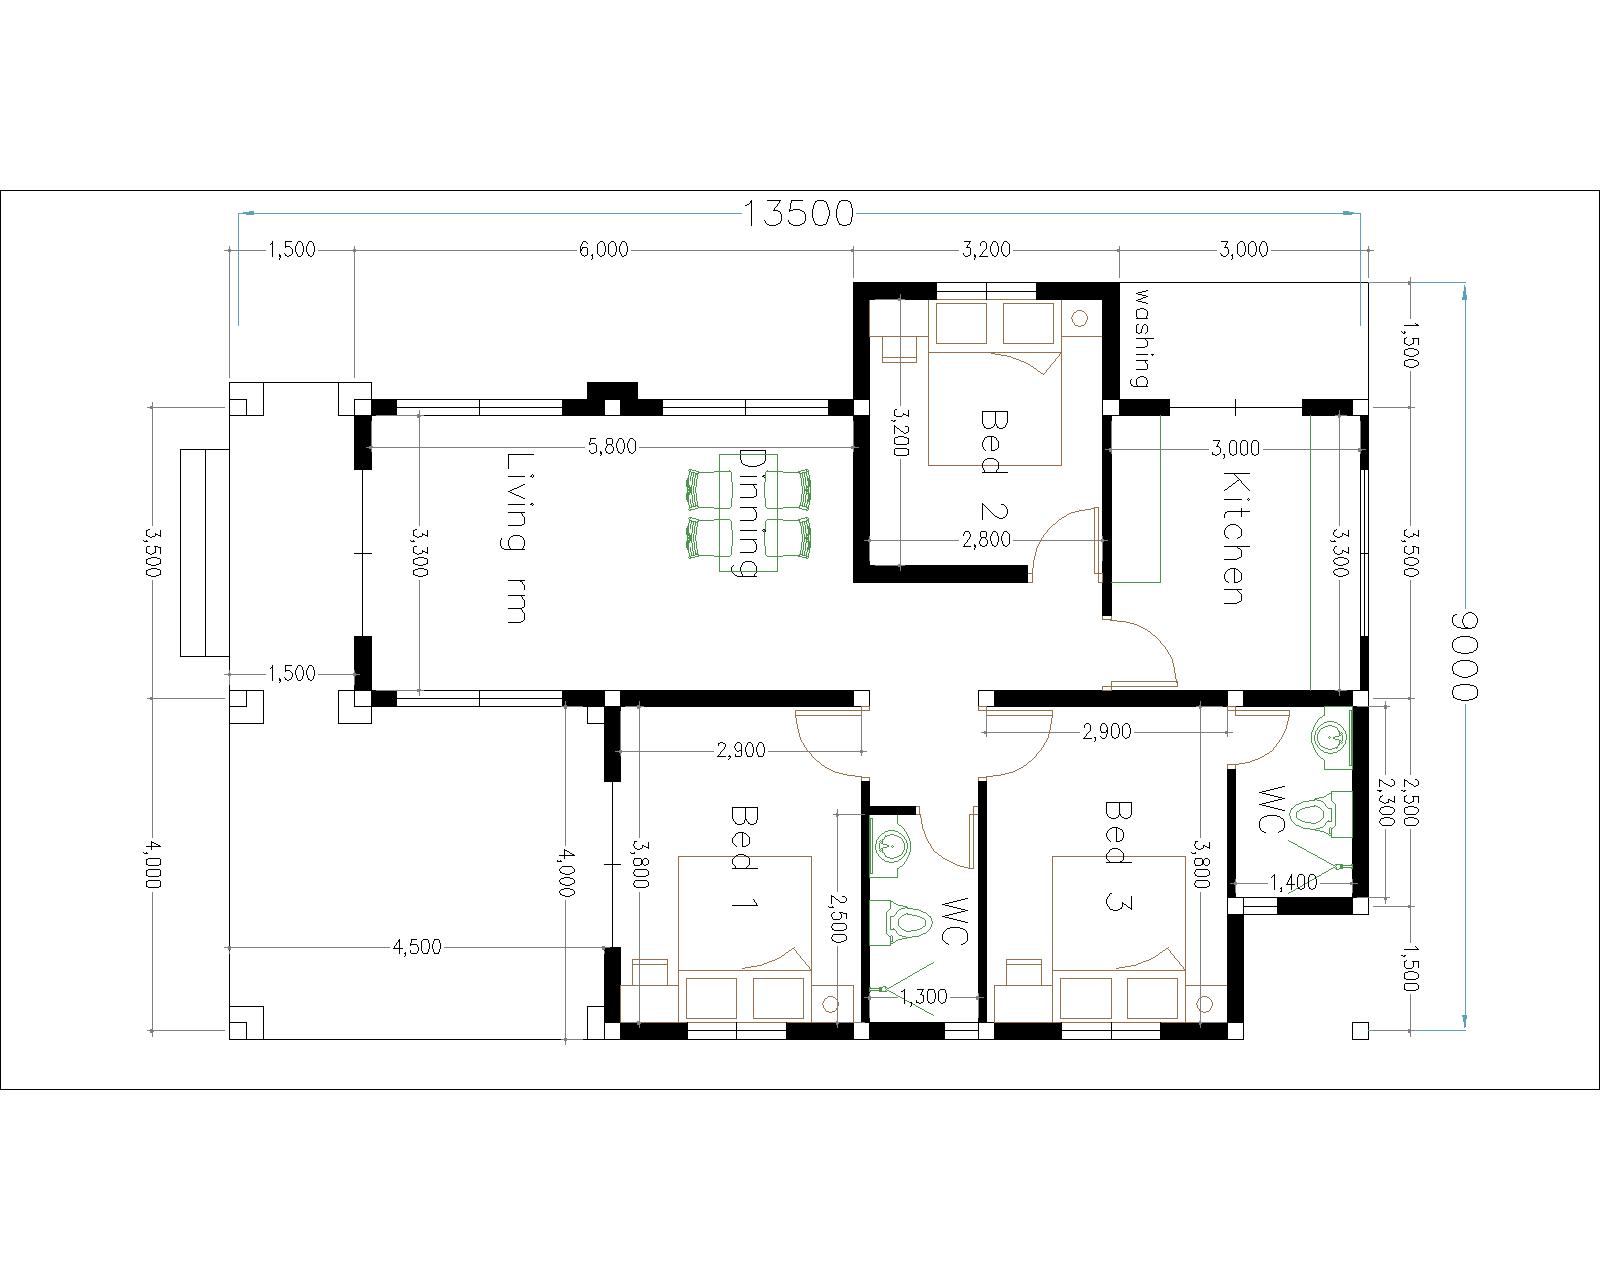 9 X 13 Living Room Layout